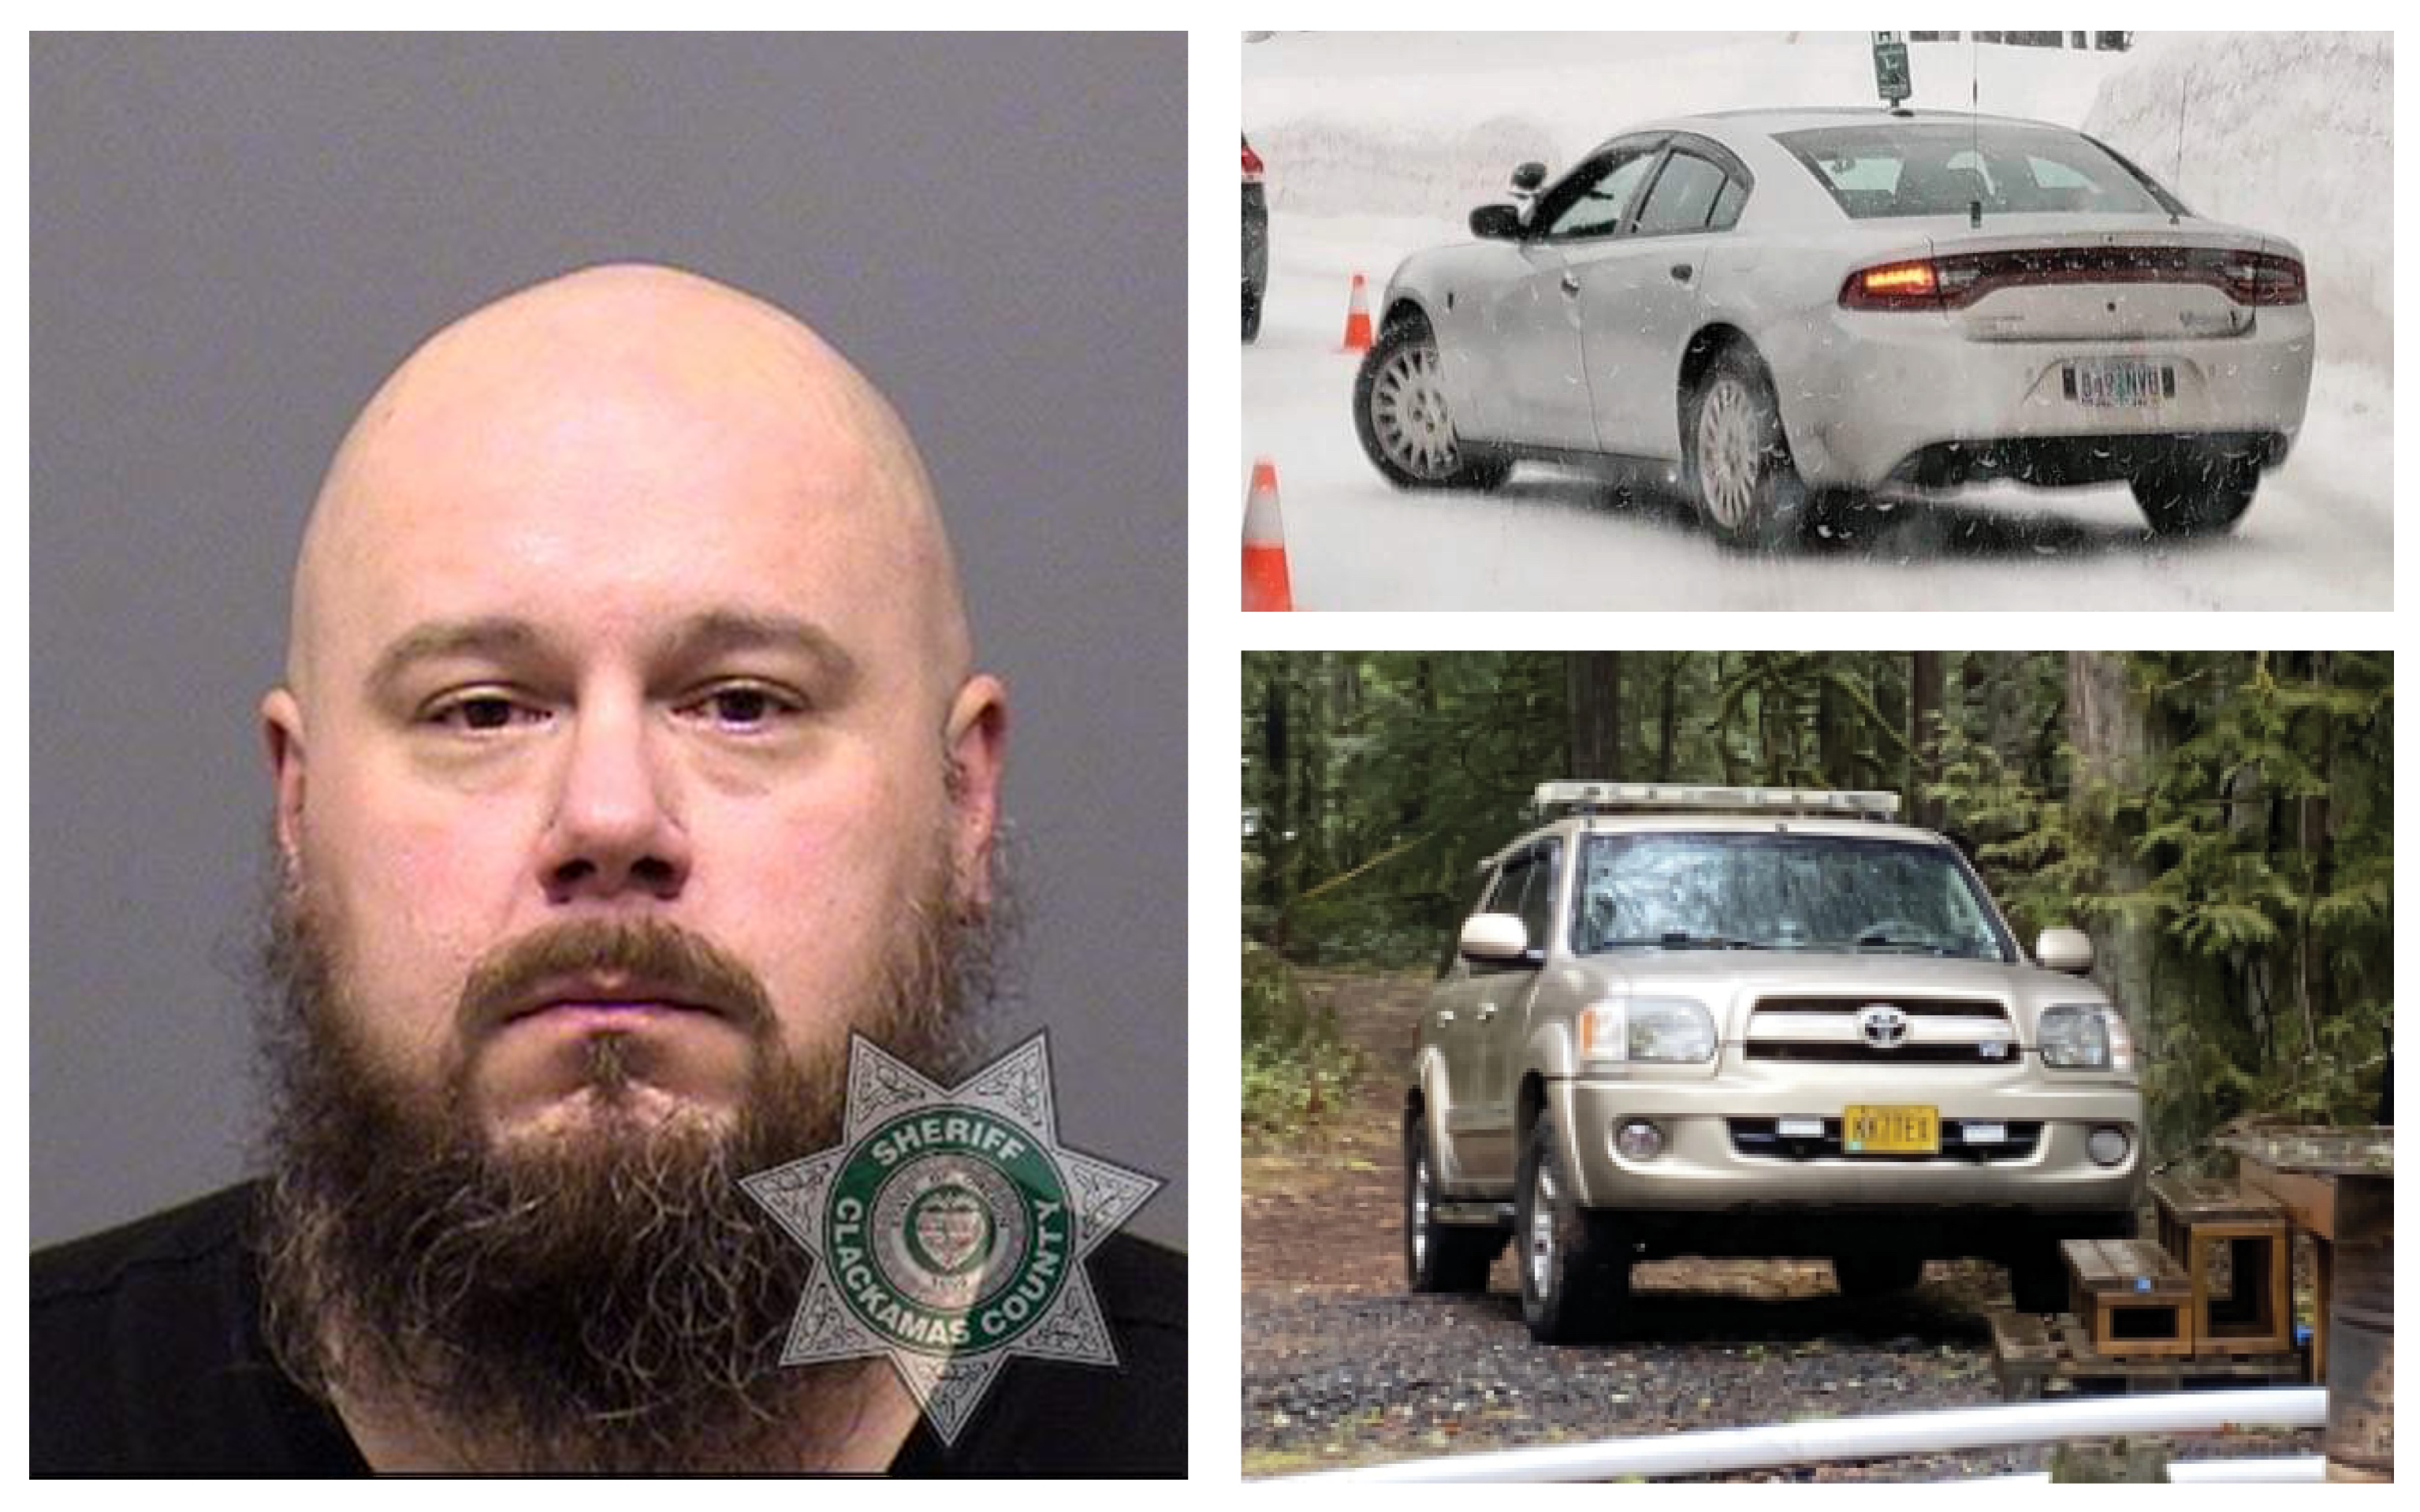 Sheriff’s Workplace seeks, suggestions, and extra data after the arrest of man impersonating police on Mt. Hood